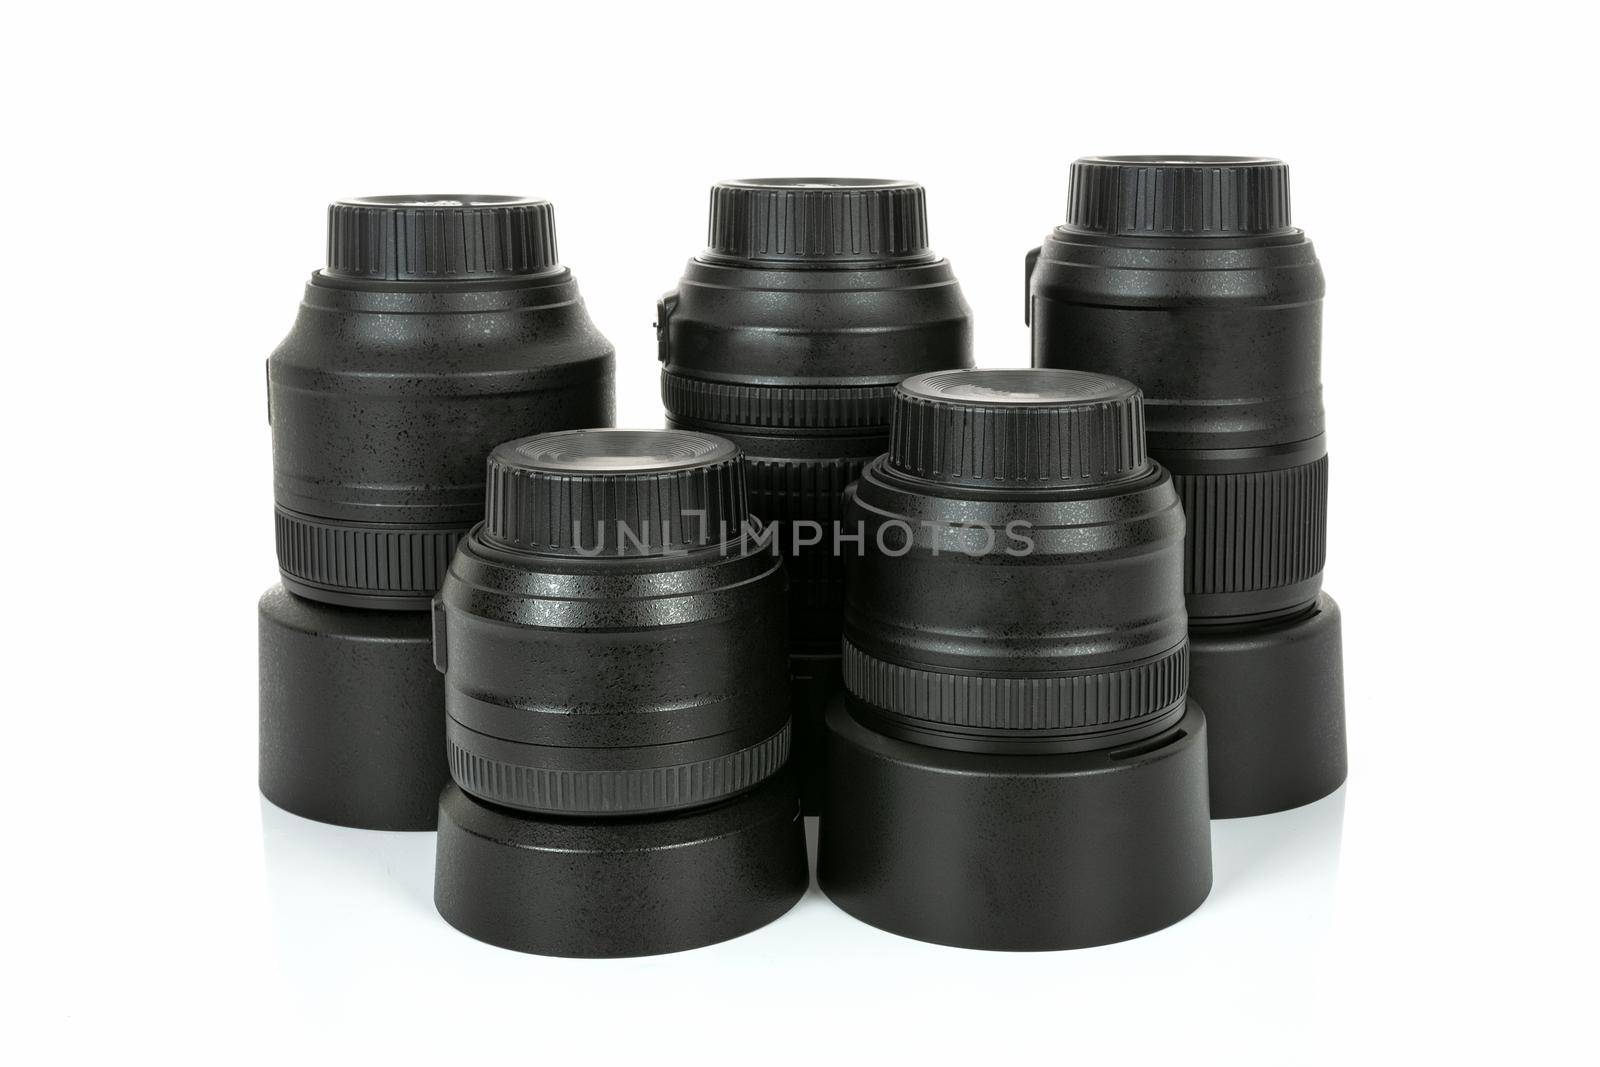 Collection of lenses by wdnet_studio